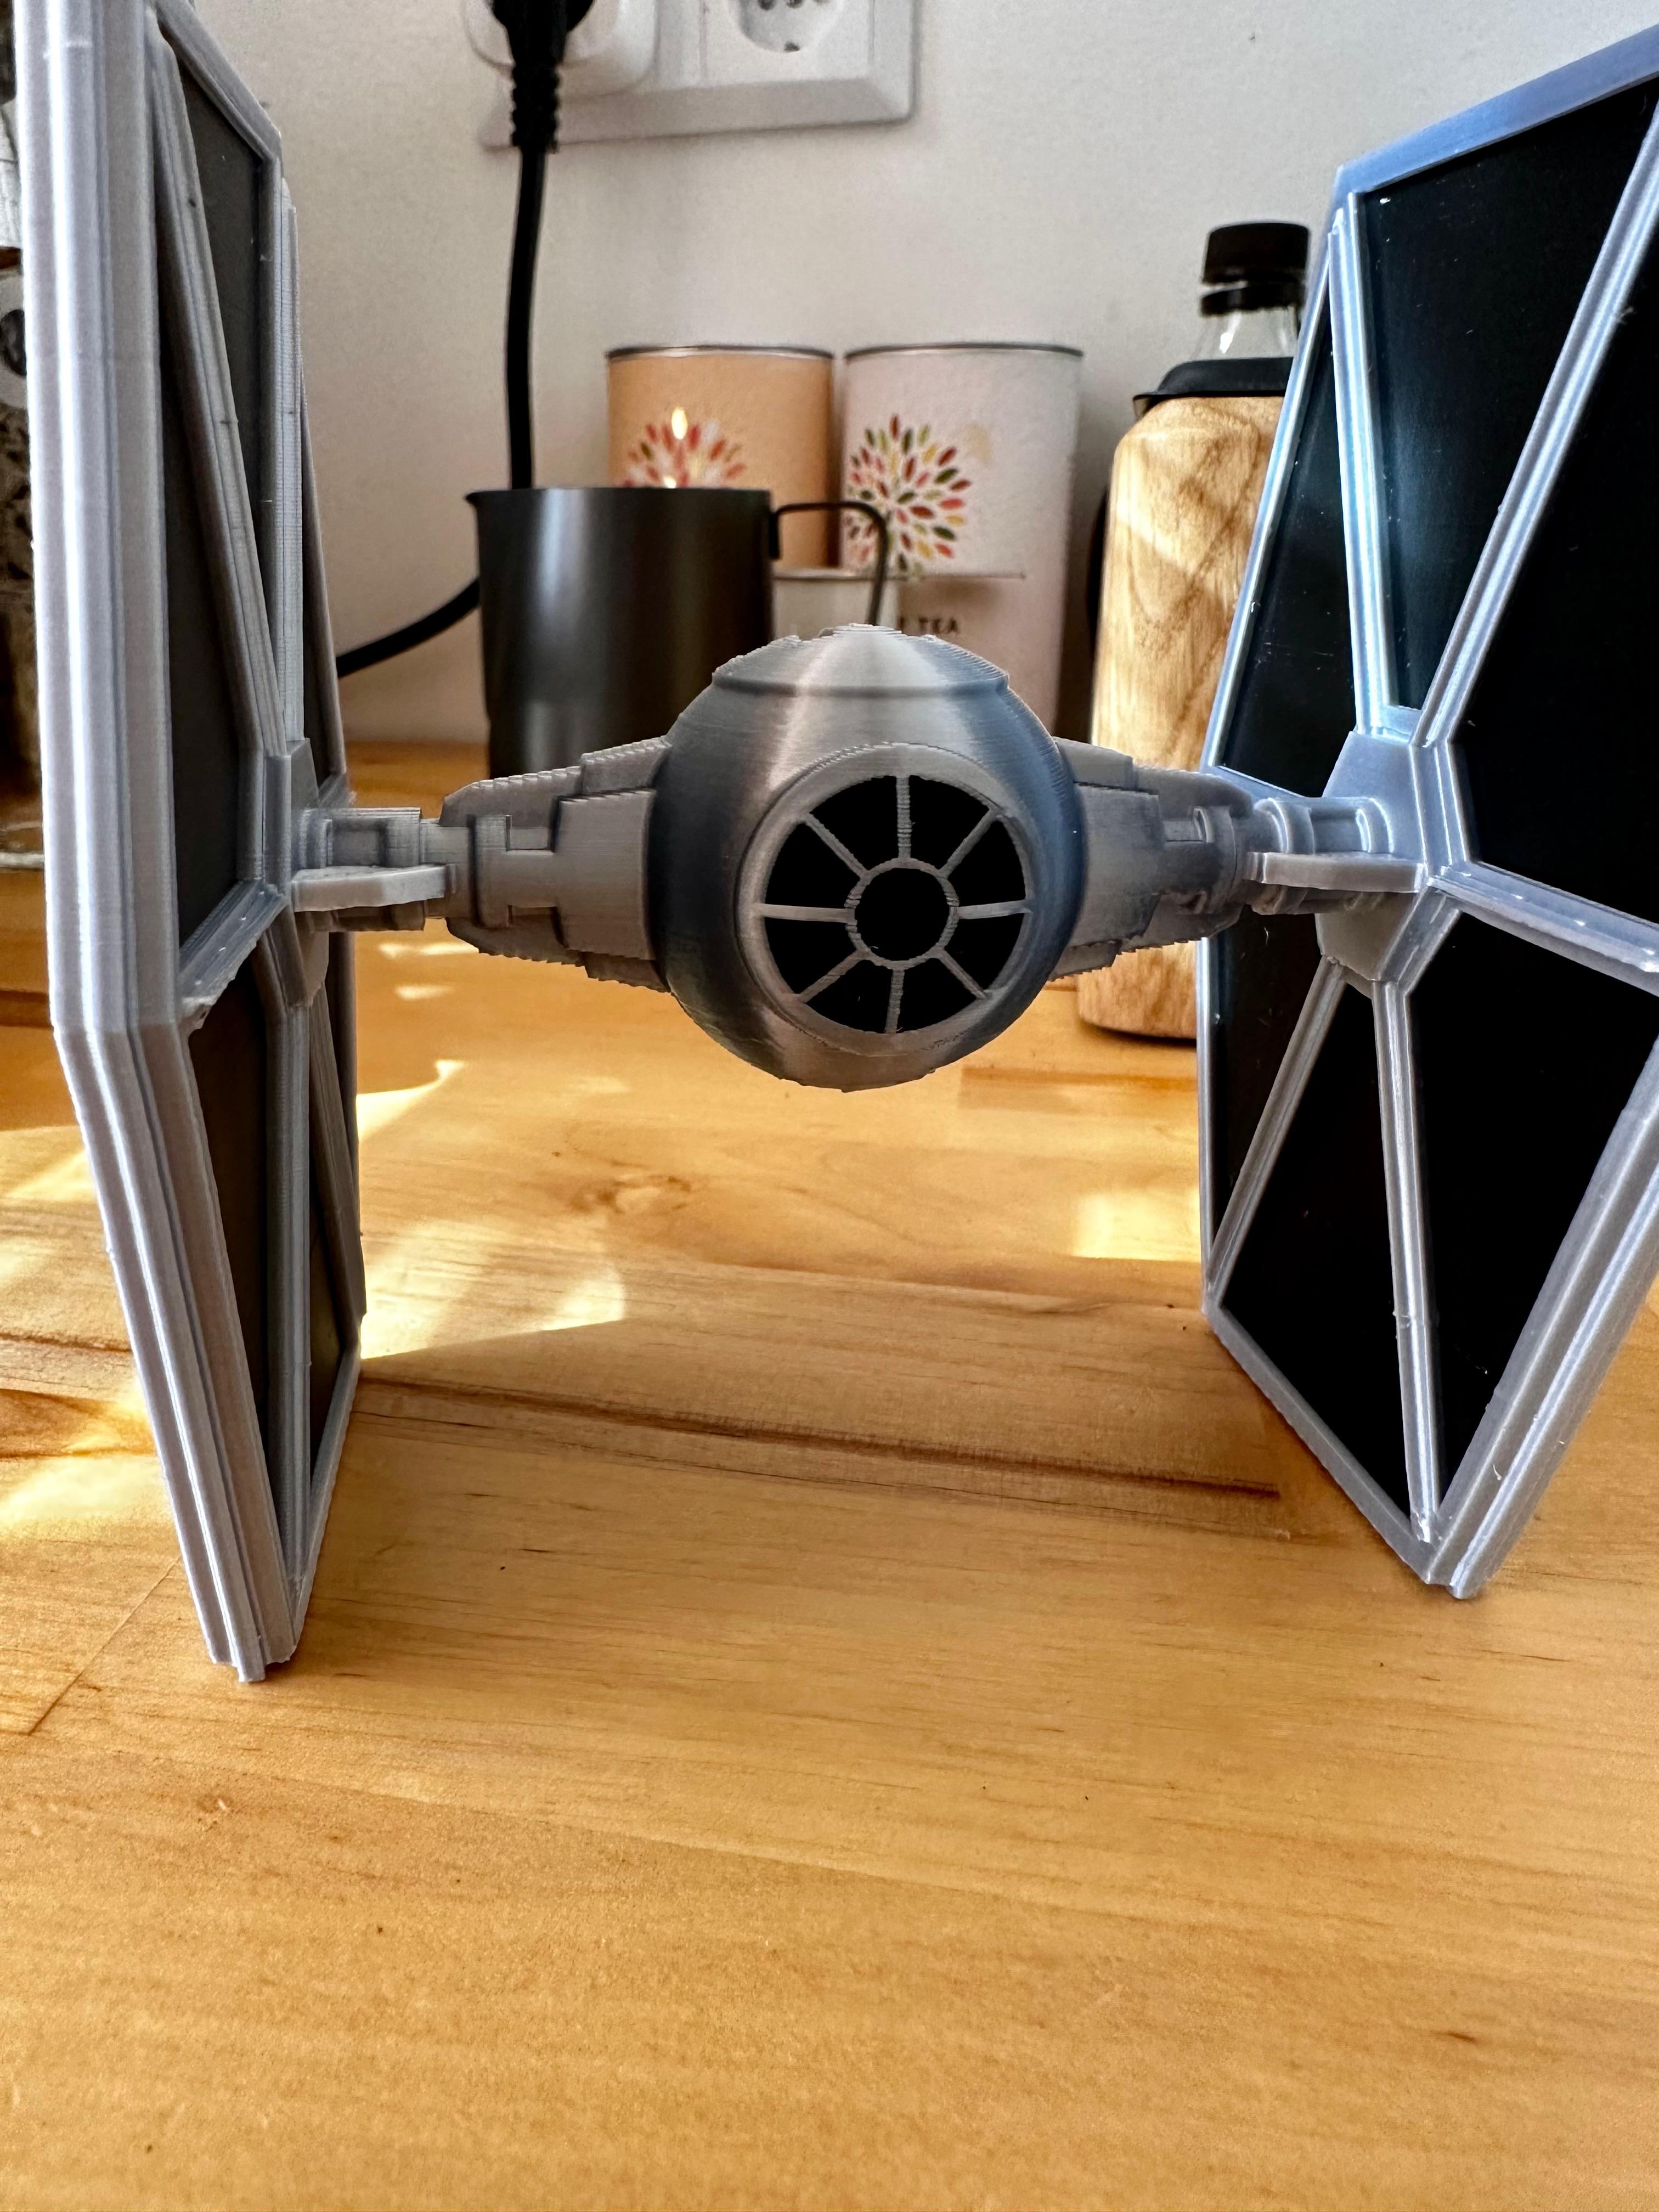 TIE Fighter -Star Wars Fanart - Printed on a P1P, PolyLite Black & PolyLite Silk Silver, turned out great! - 3d model